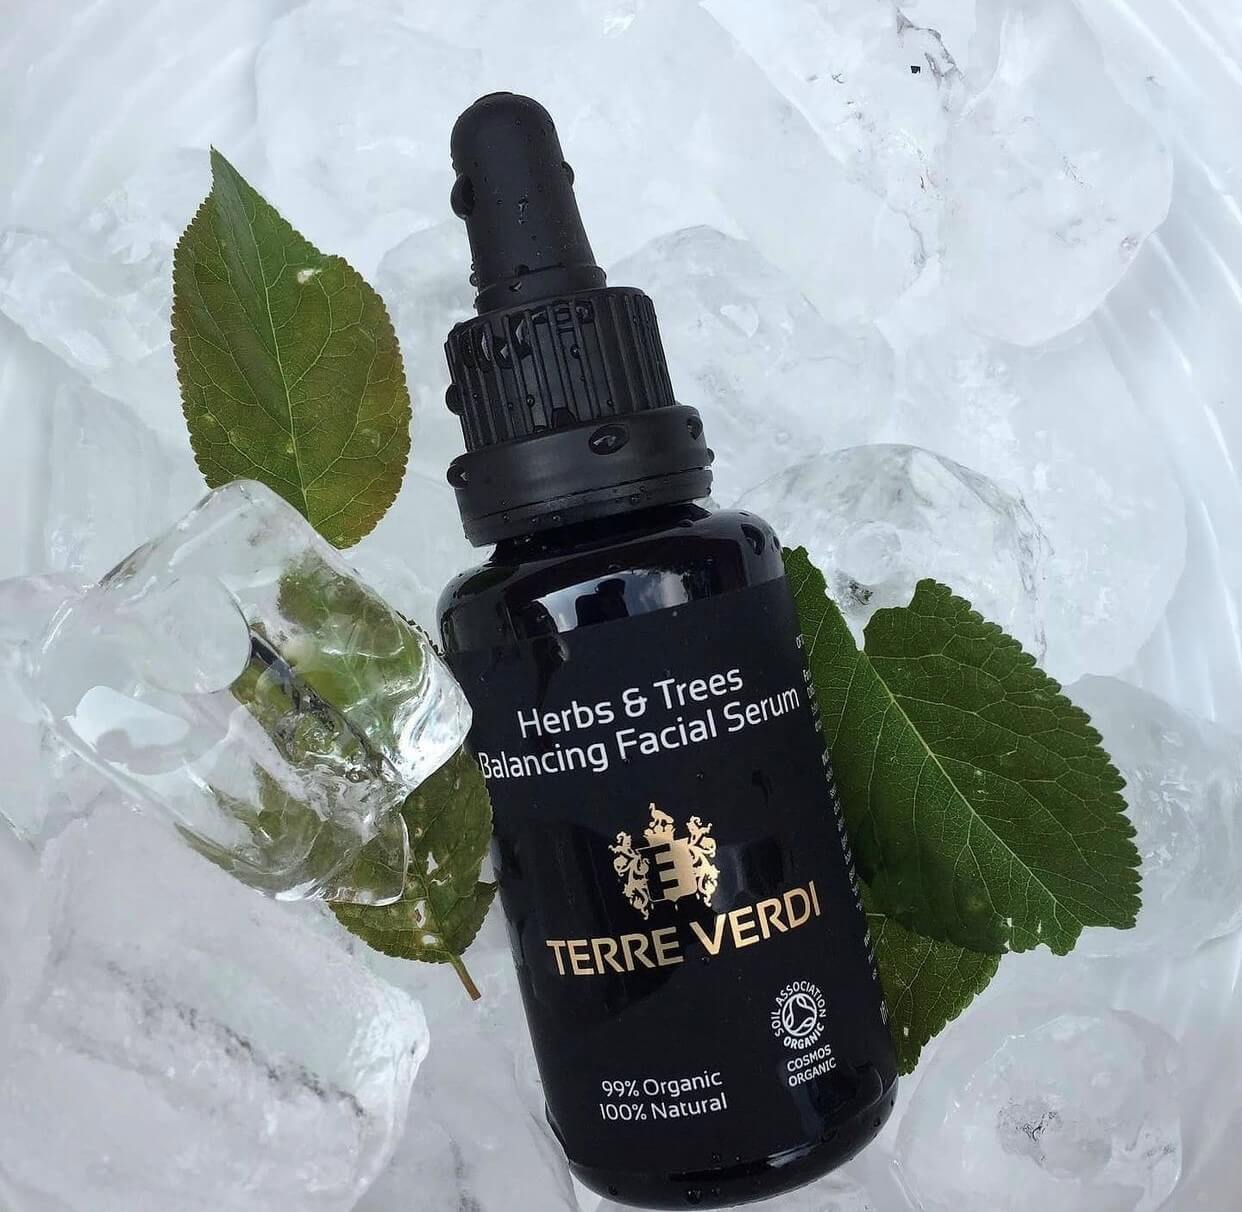 Buy One Get One Free on all Terre Verdi Products. Skincare Organic, Vegan, Cruelty Free, Plastic Free, Eco-Friendly, Combination Skin Type Products, Whilst stocks last